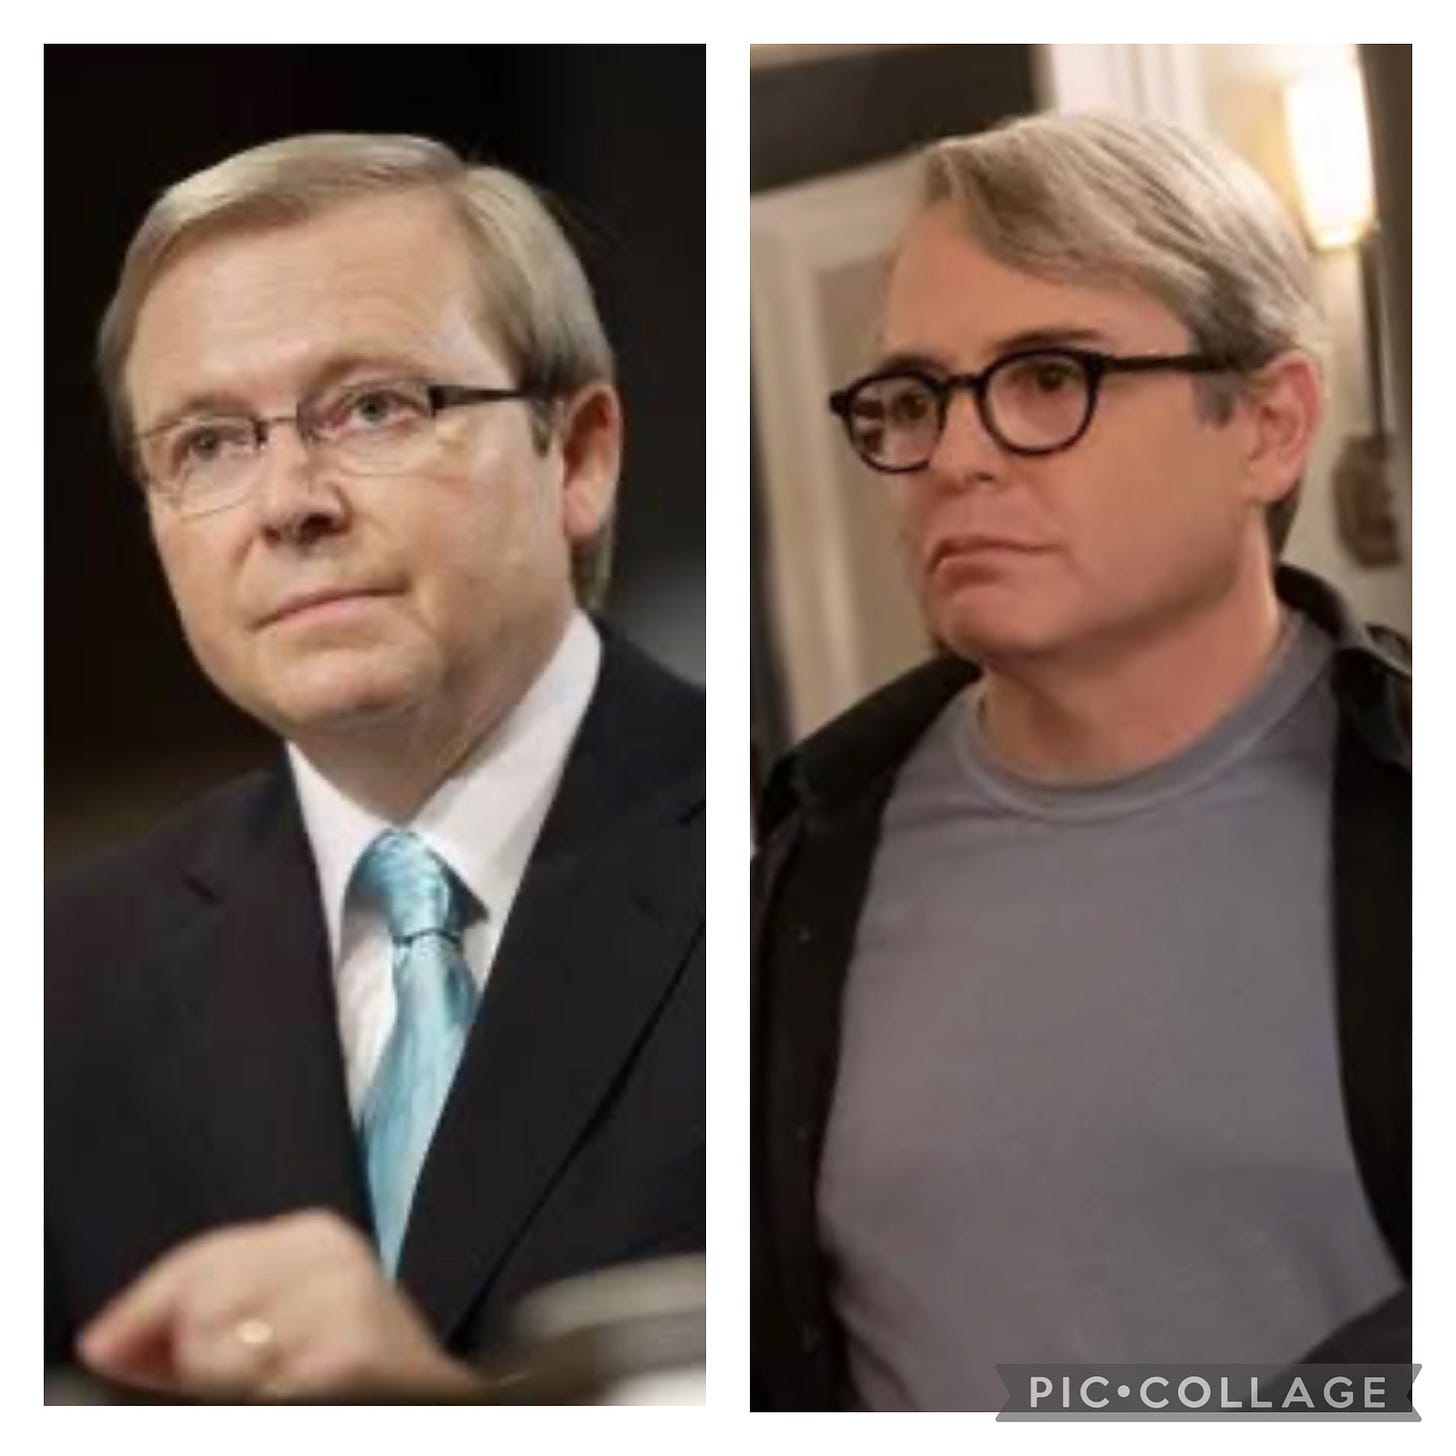 Photo of two round faced men with straight grey hair and glasses; one is Kevin Rudd, the other is Matthew Broderick